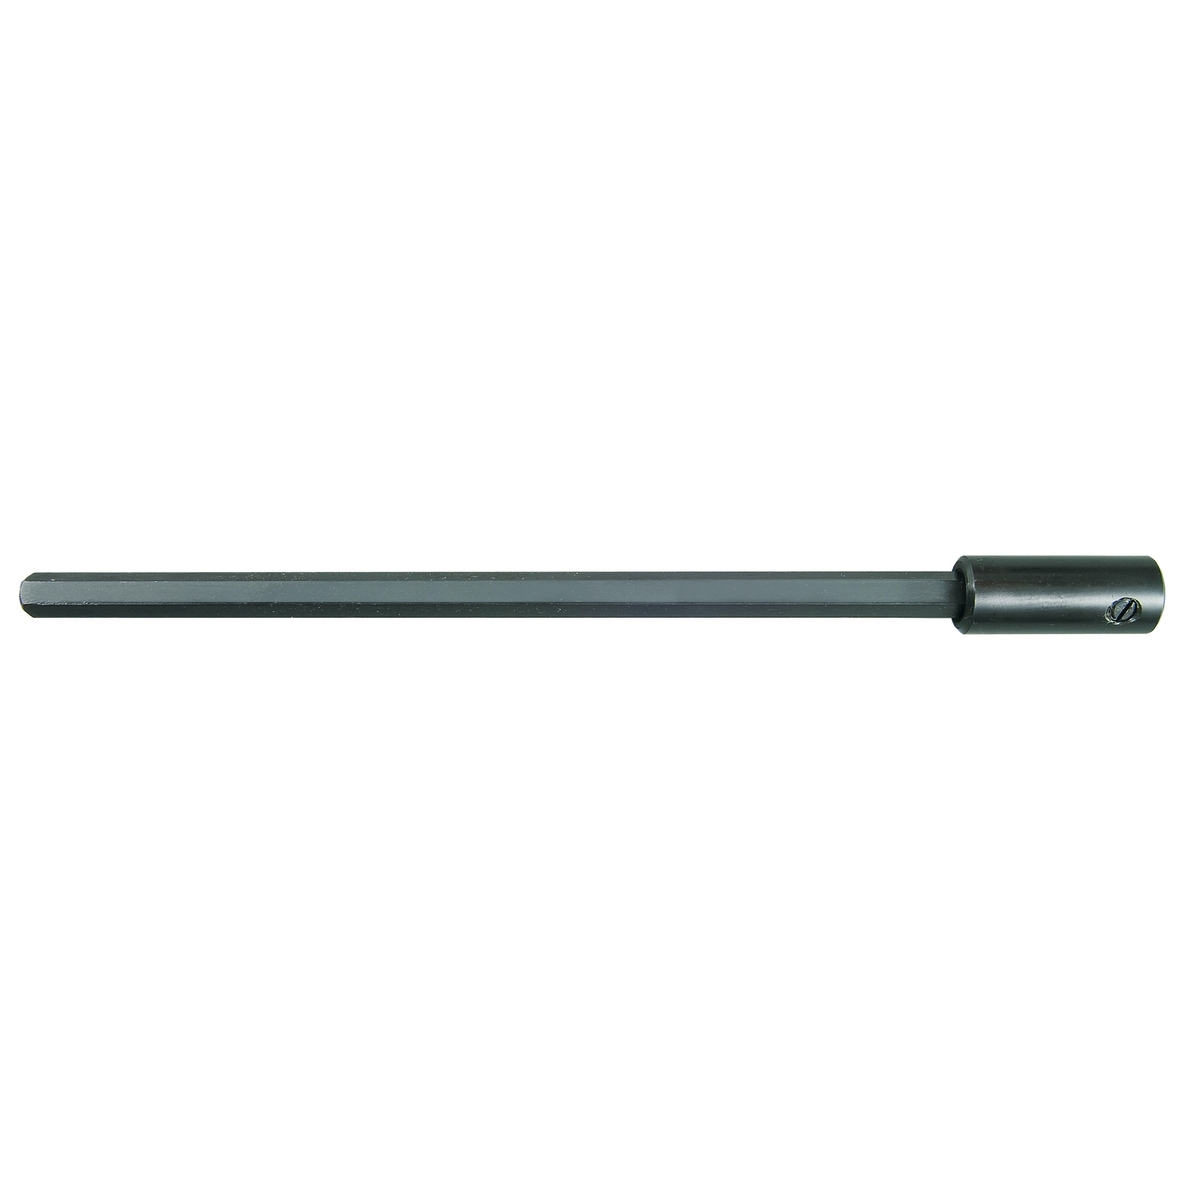 752190 EXTENSION ROD 300 MM HOLE SAW